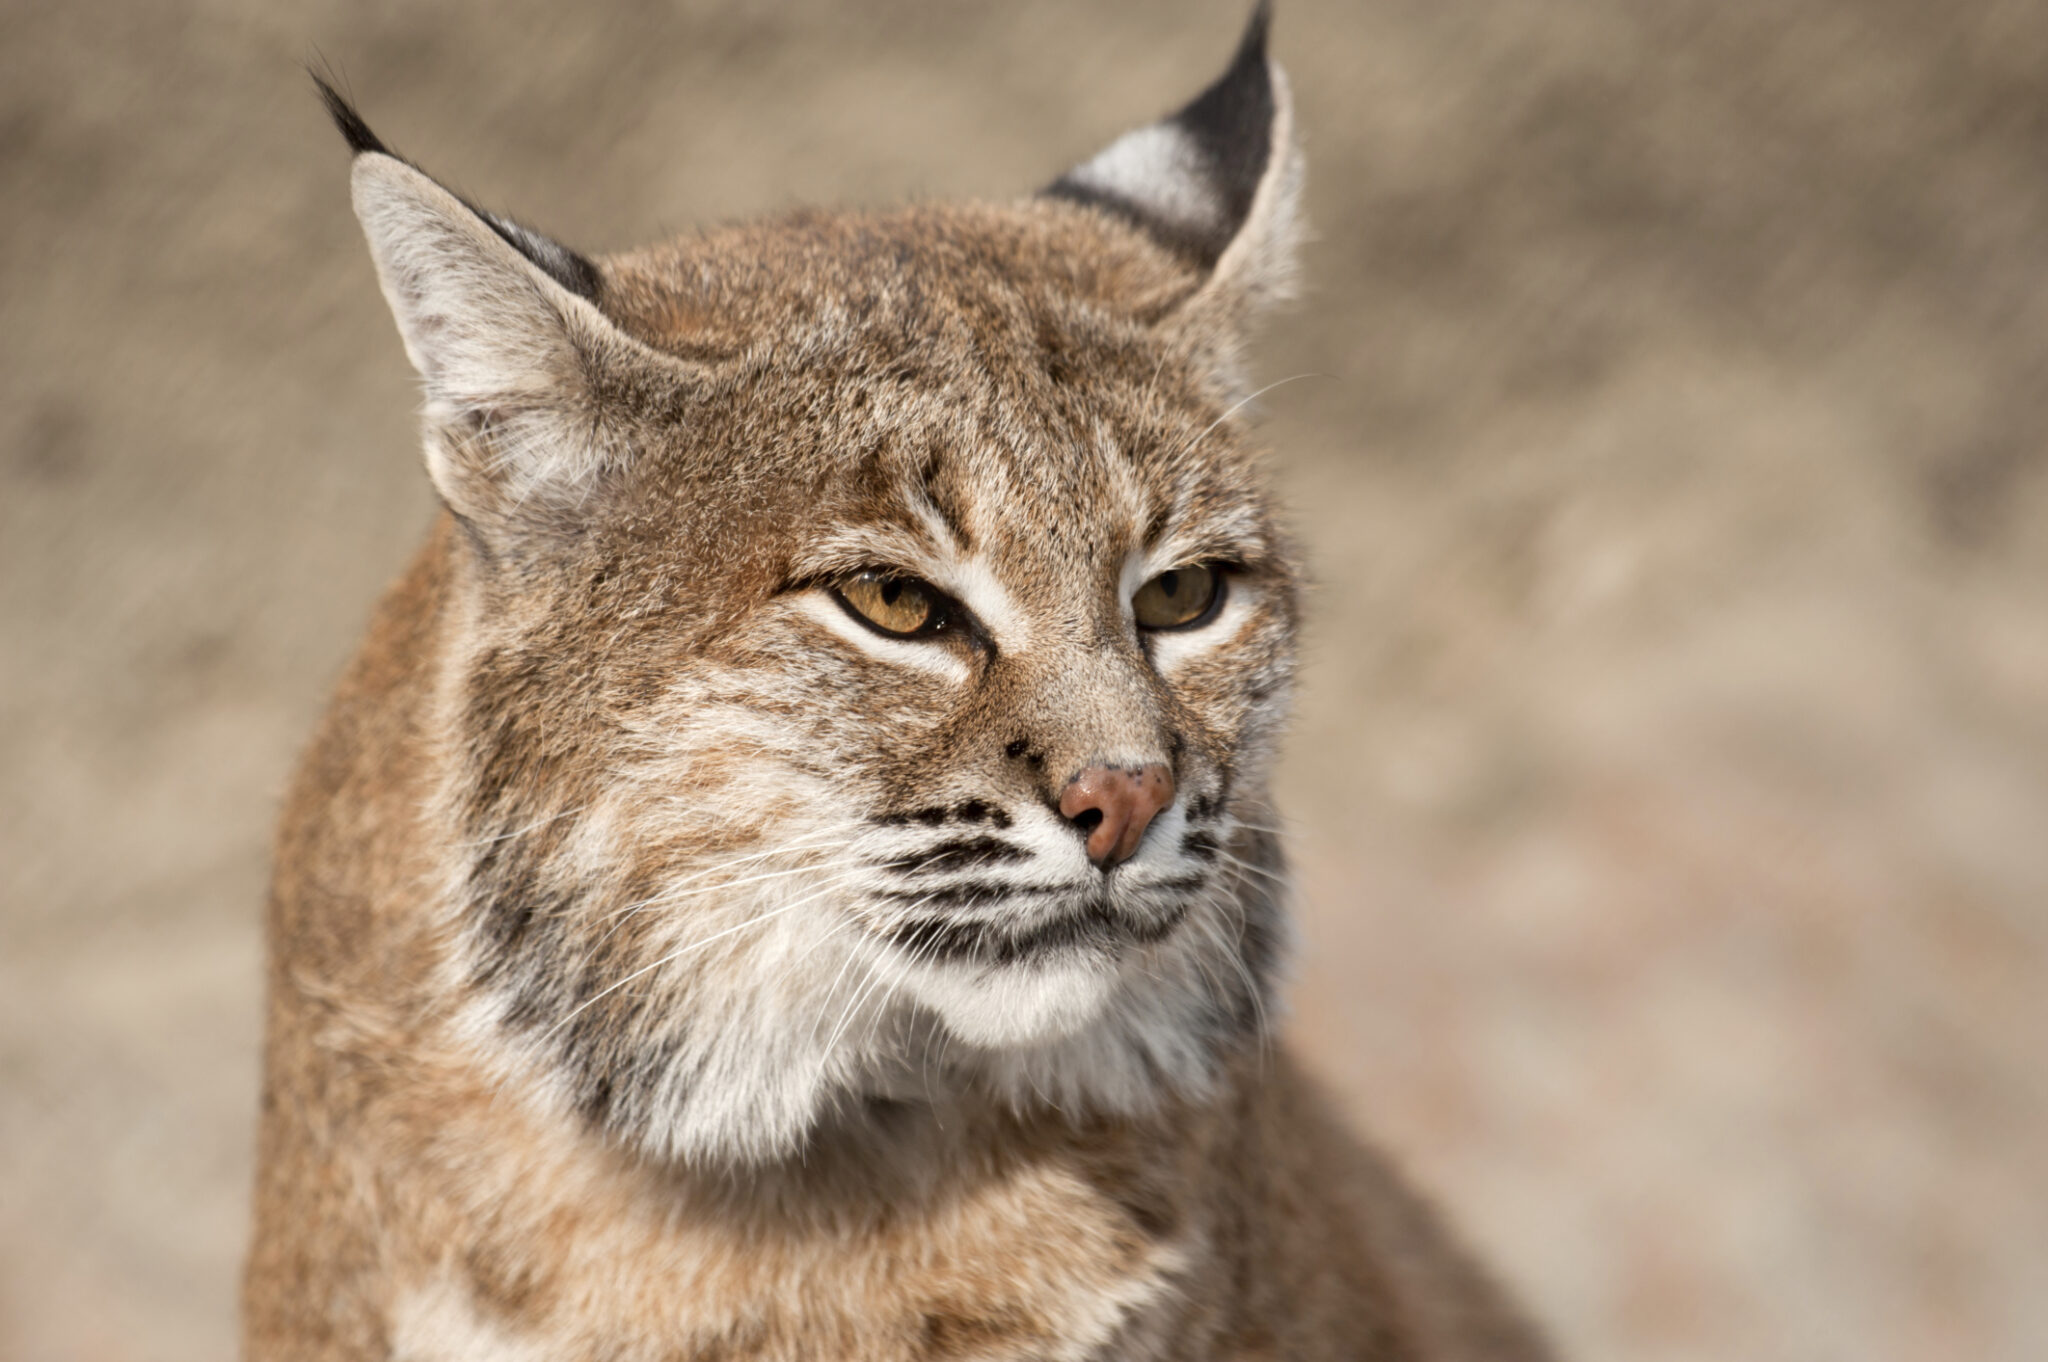 how did the lynx get its name what does it mean in latin and where does the wild cat live